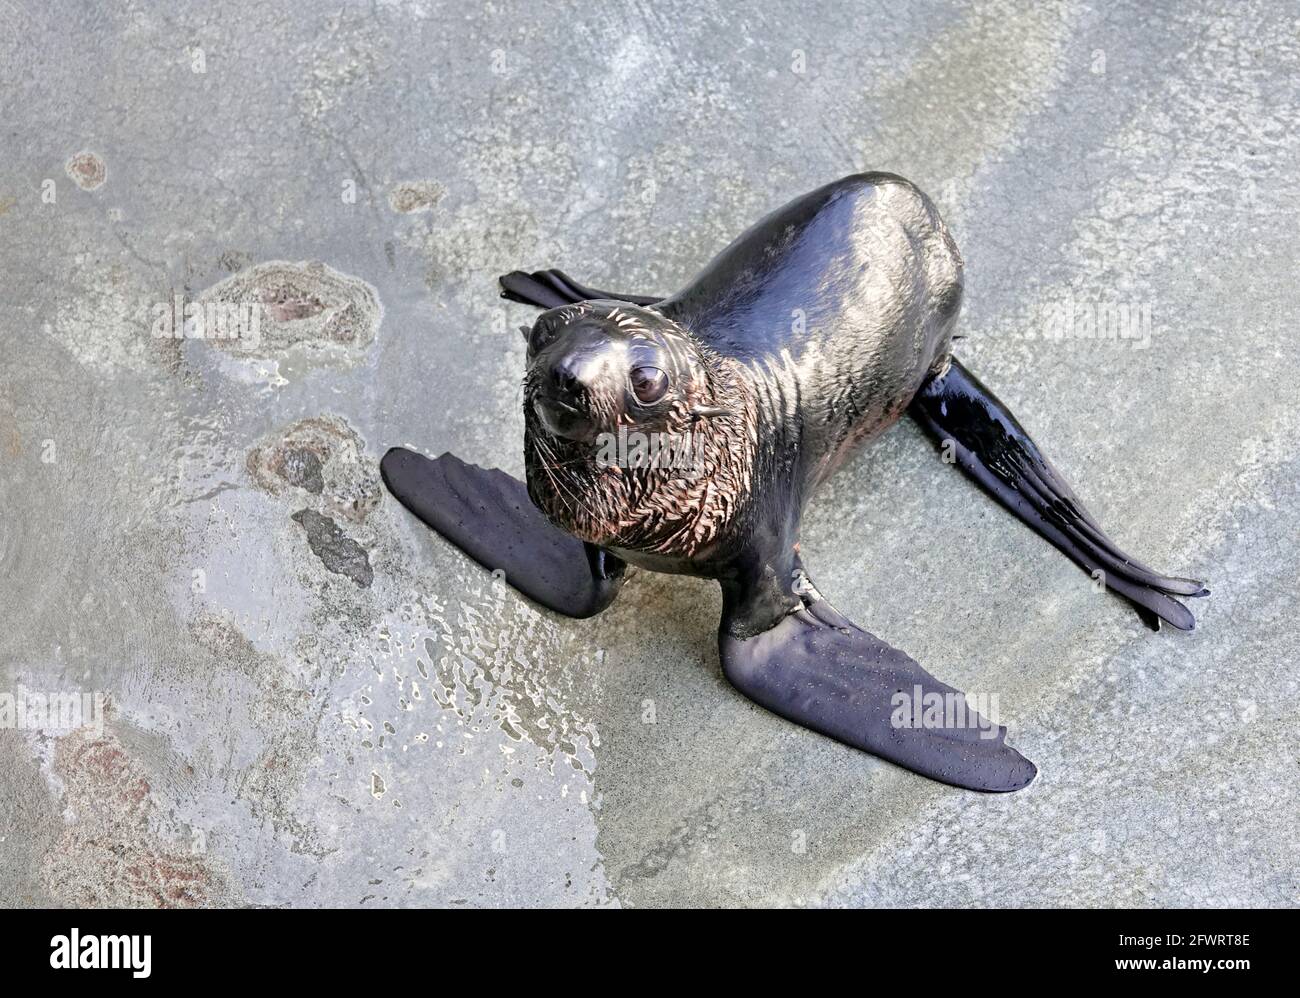 Portrait of a California fur seal, also called a northern fur seal,  Callorhinus ursinus, a marine mammal found mainly in the Pacific Ocean. Fur  seals don't have blubber; instead, they have very